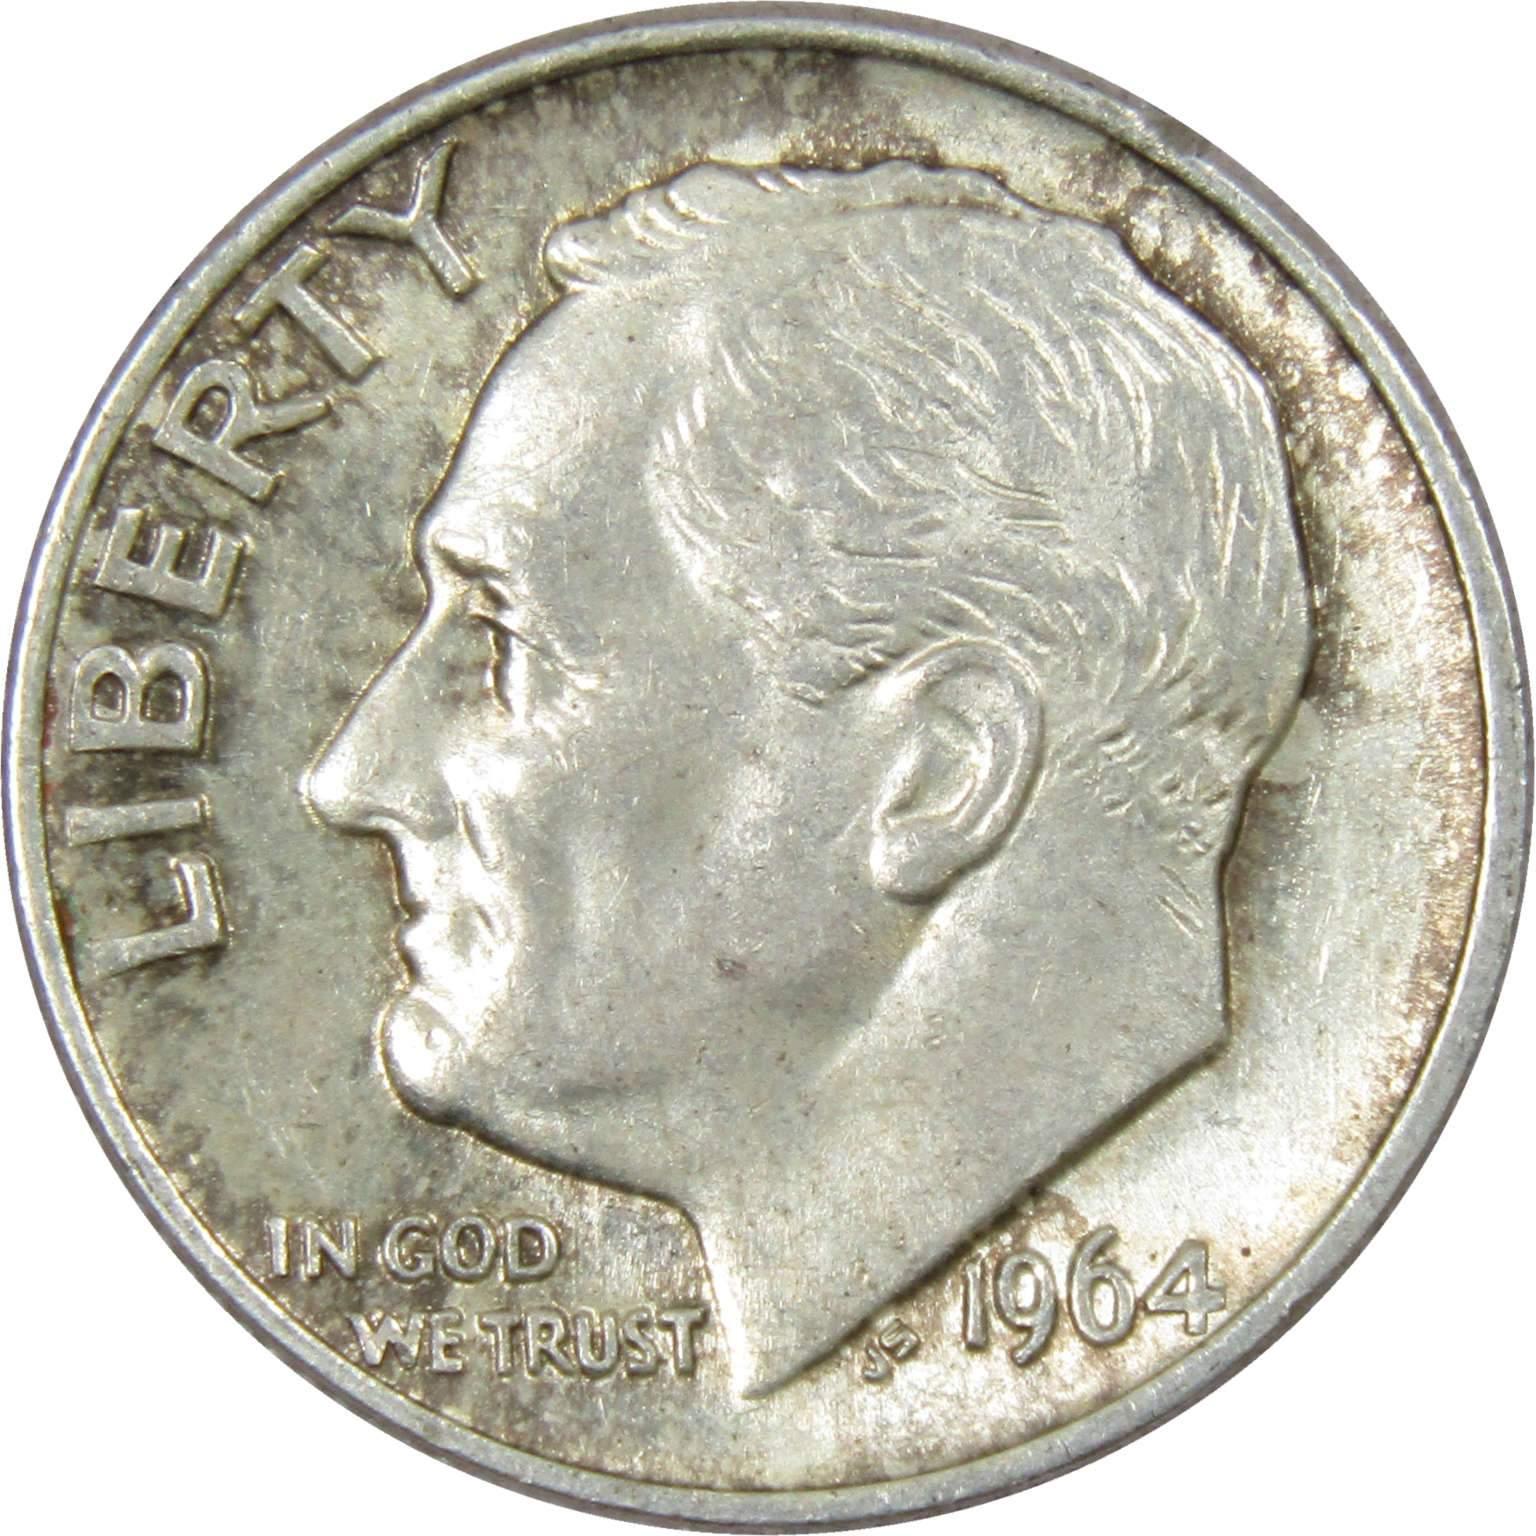 1964 Roosevelt Dime AG About Good 90% Silver 10c US Coin Collectible